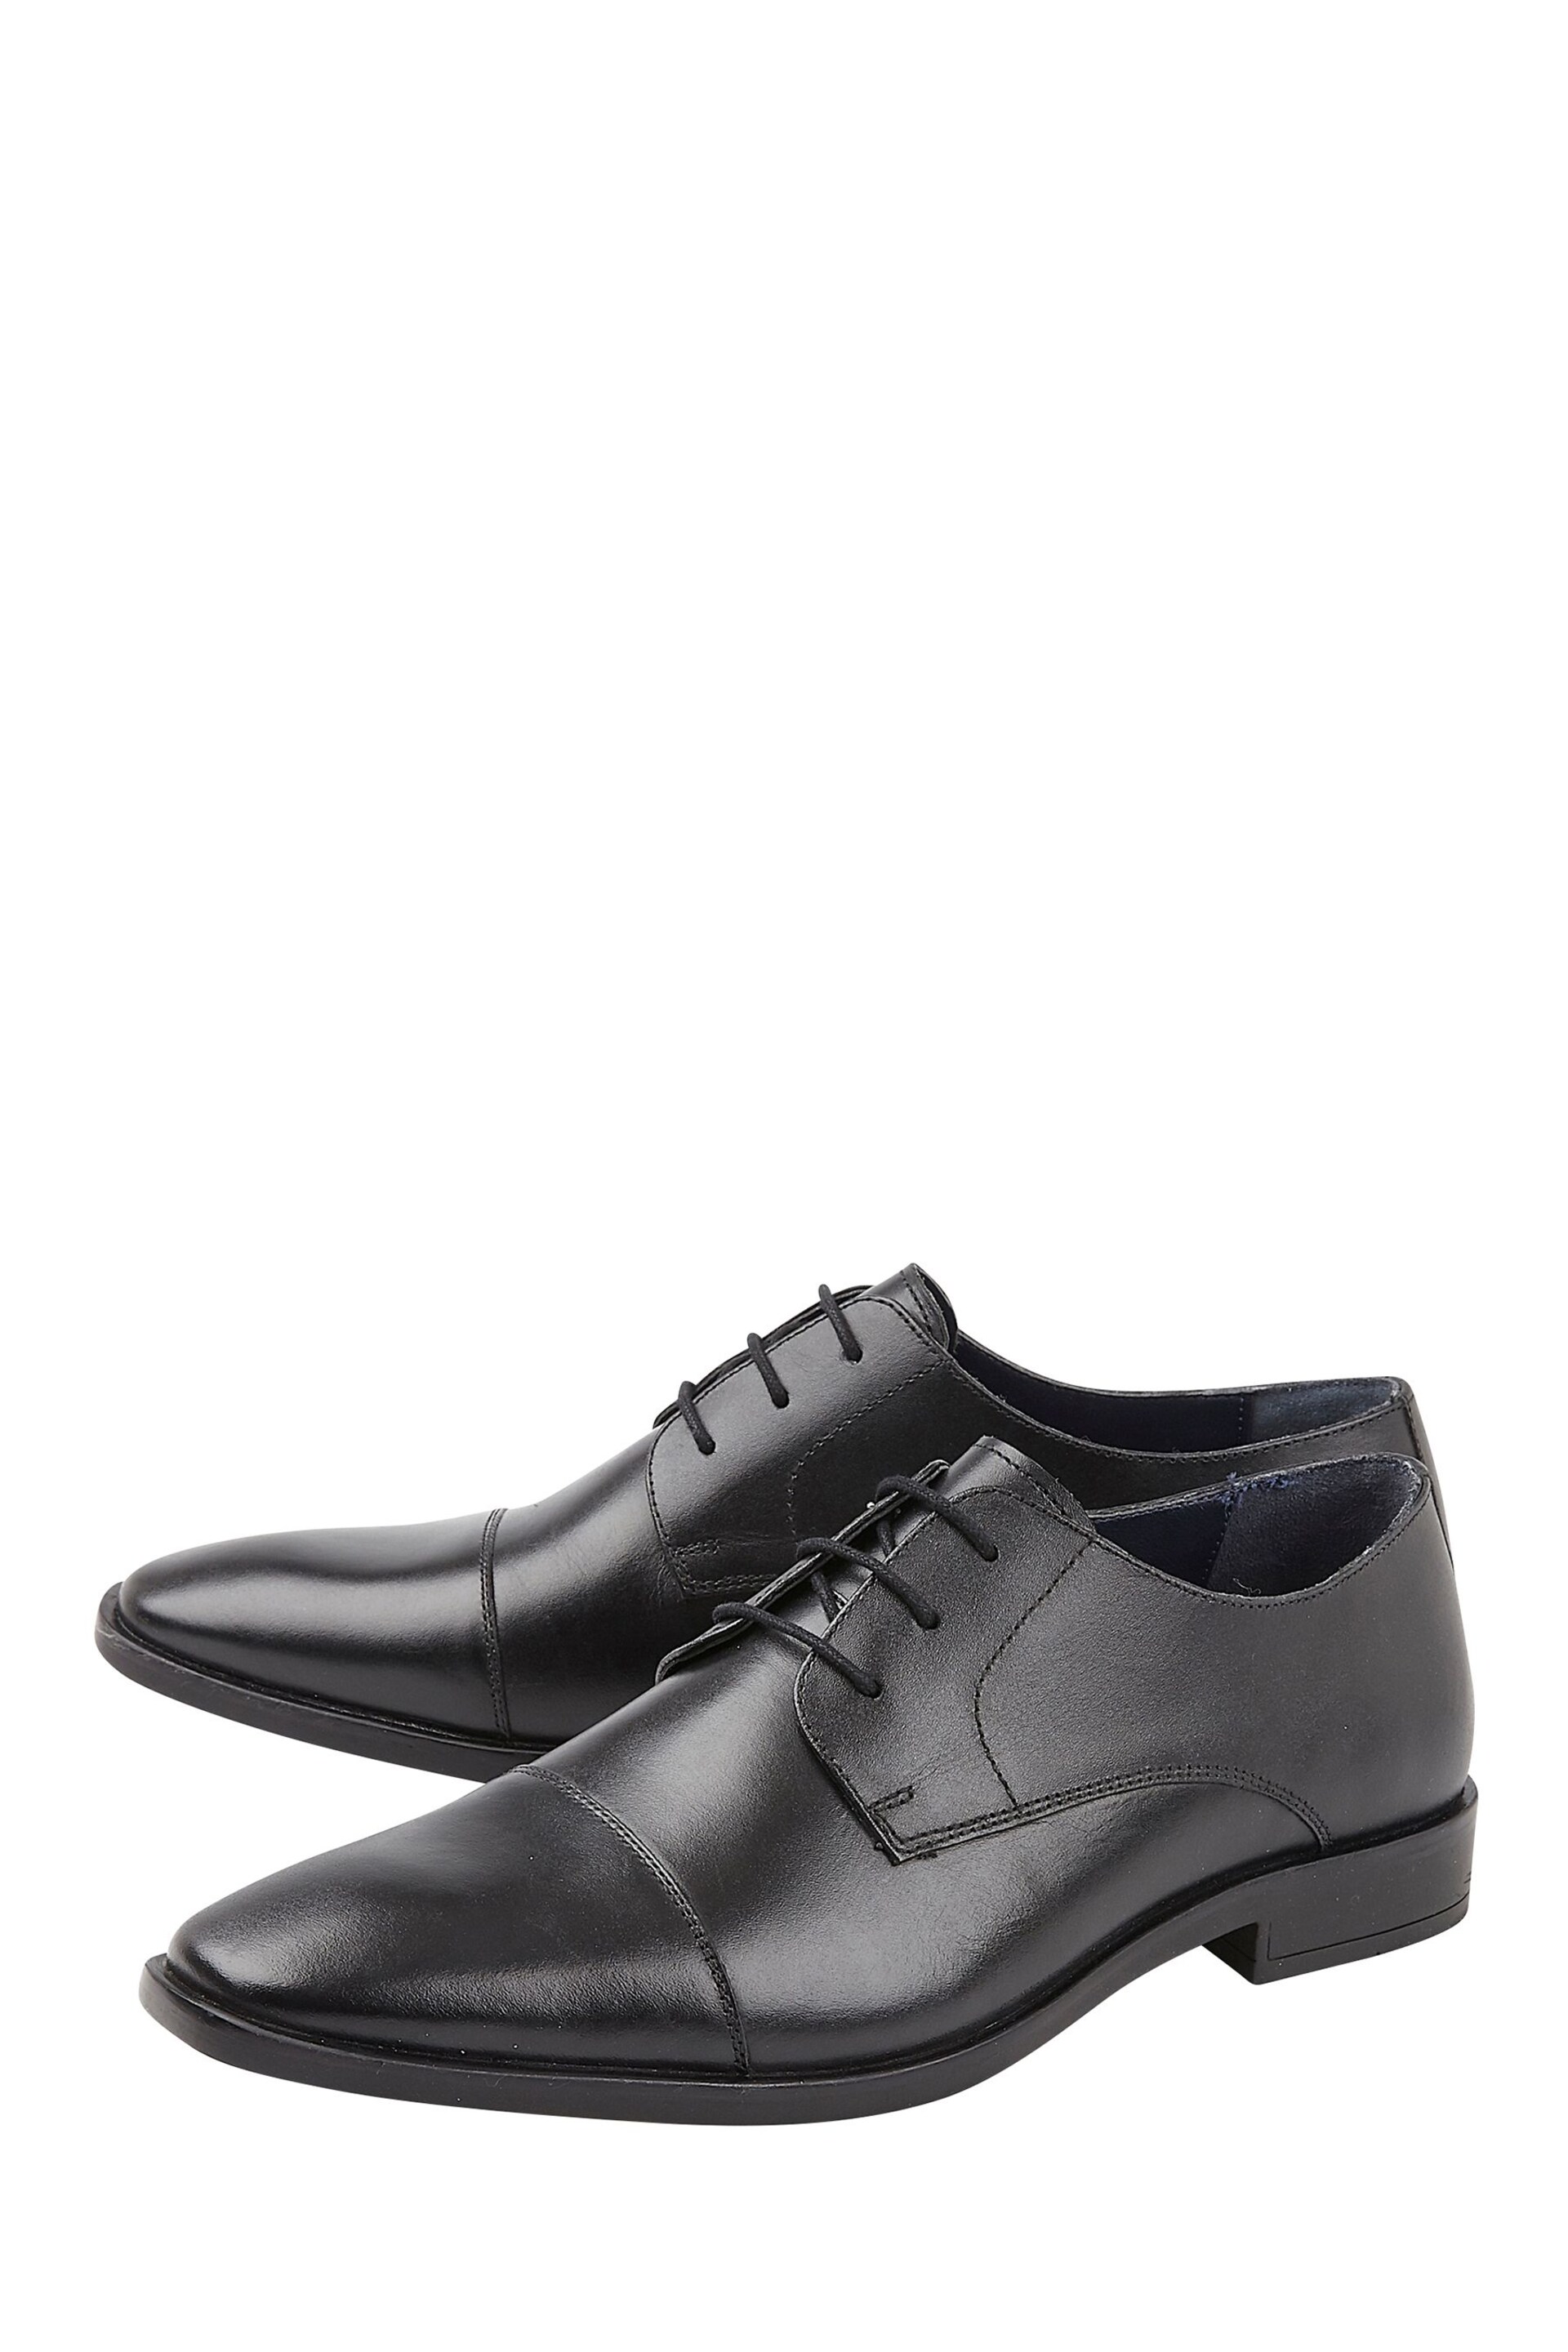 Lotus Onyx Black Leather Derby Shoes - Image 2 of 4